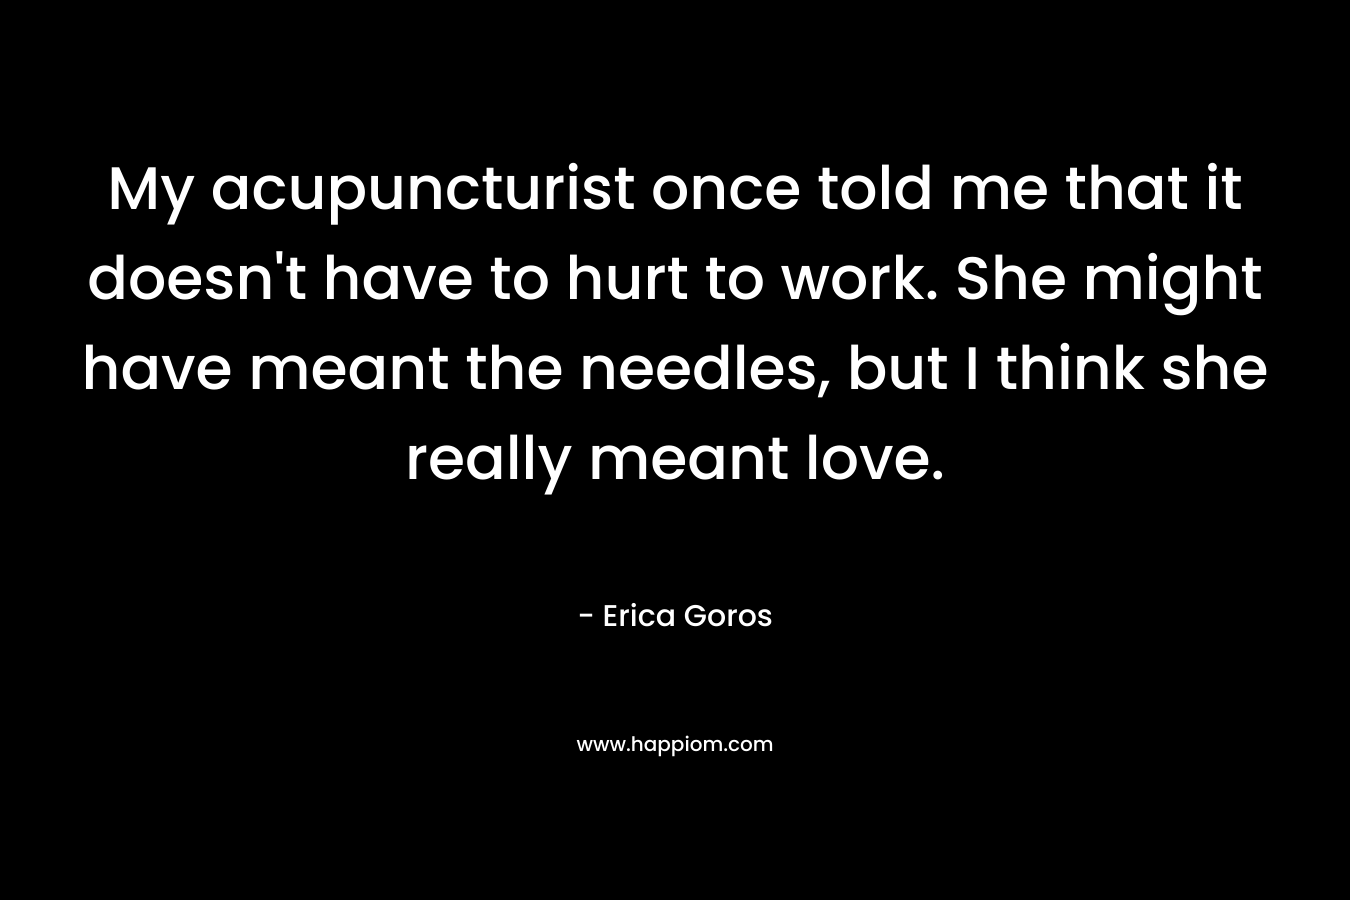 My acupuncturist once told me that it doesn't have to hurt to work. She might have meant the needles, but I think she really meant love.